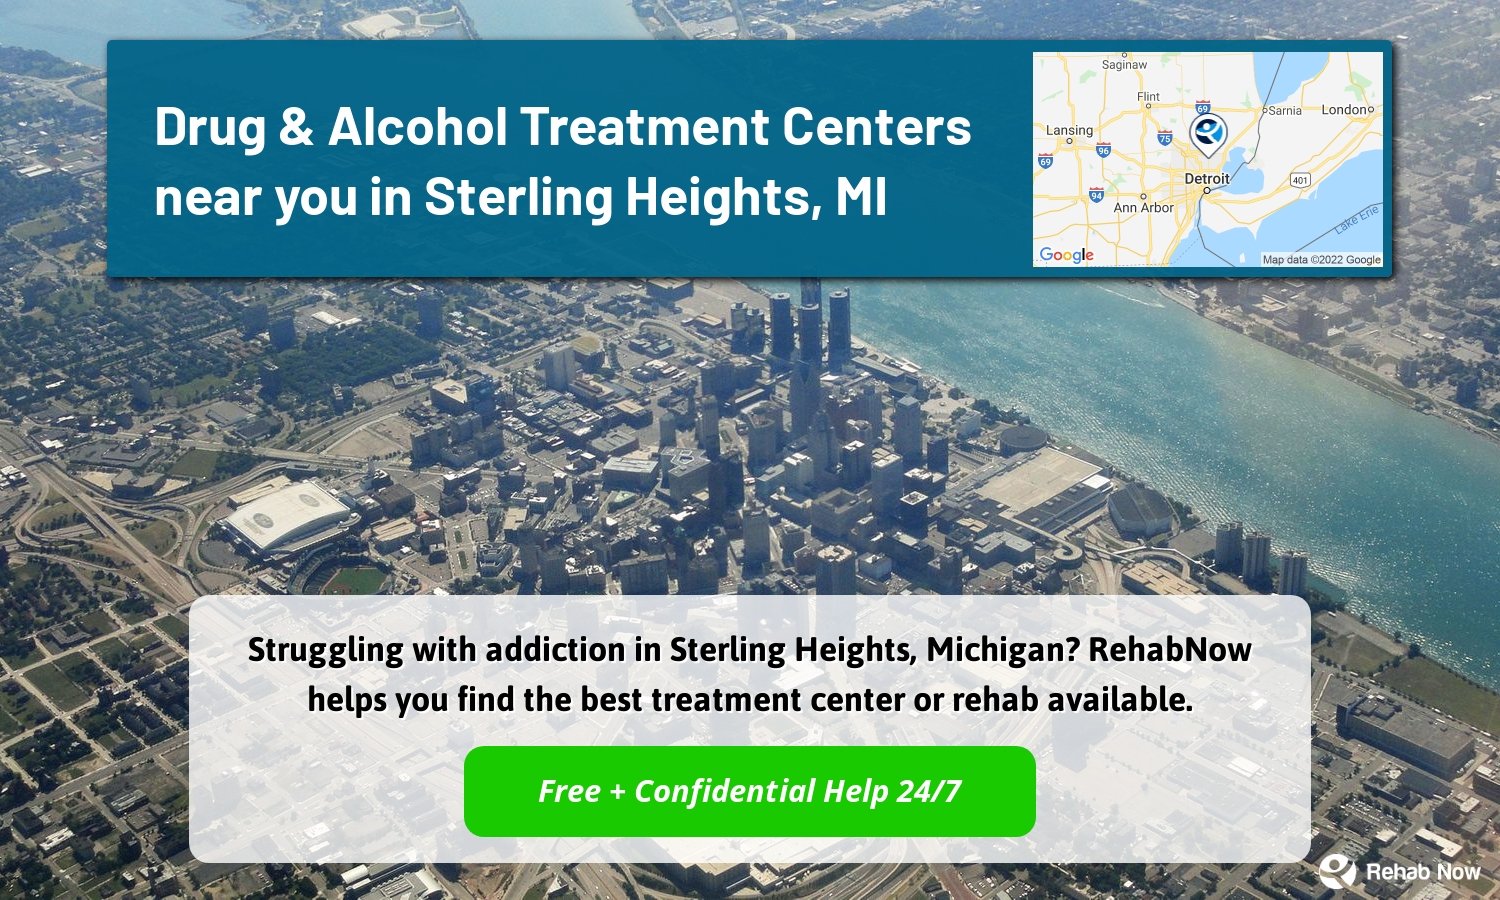 Struggling with addiction in Sterling Heights, Michigan? RehabNow helps you find the best treatment center or rehab available.